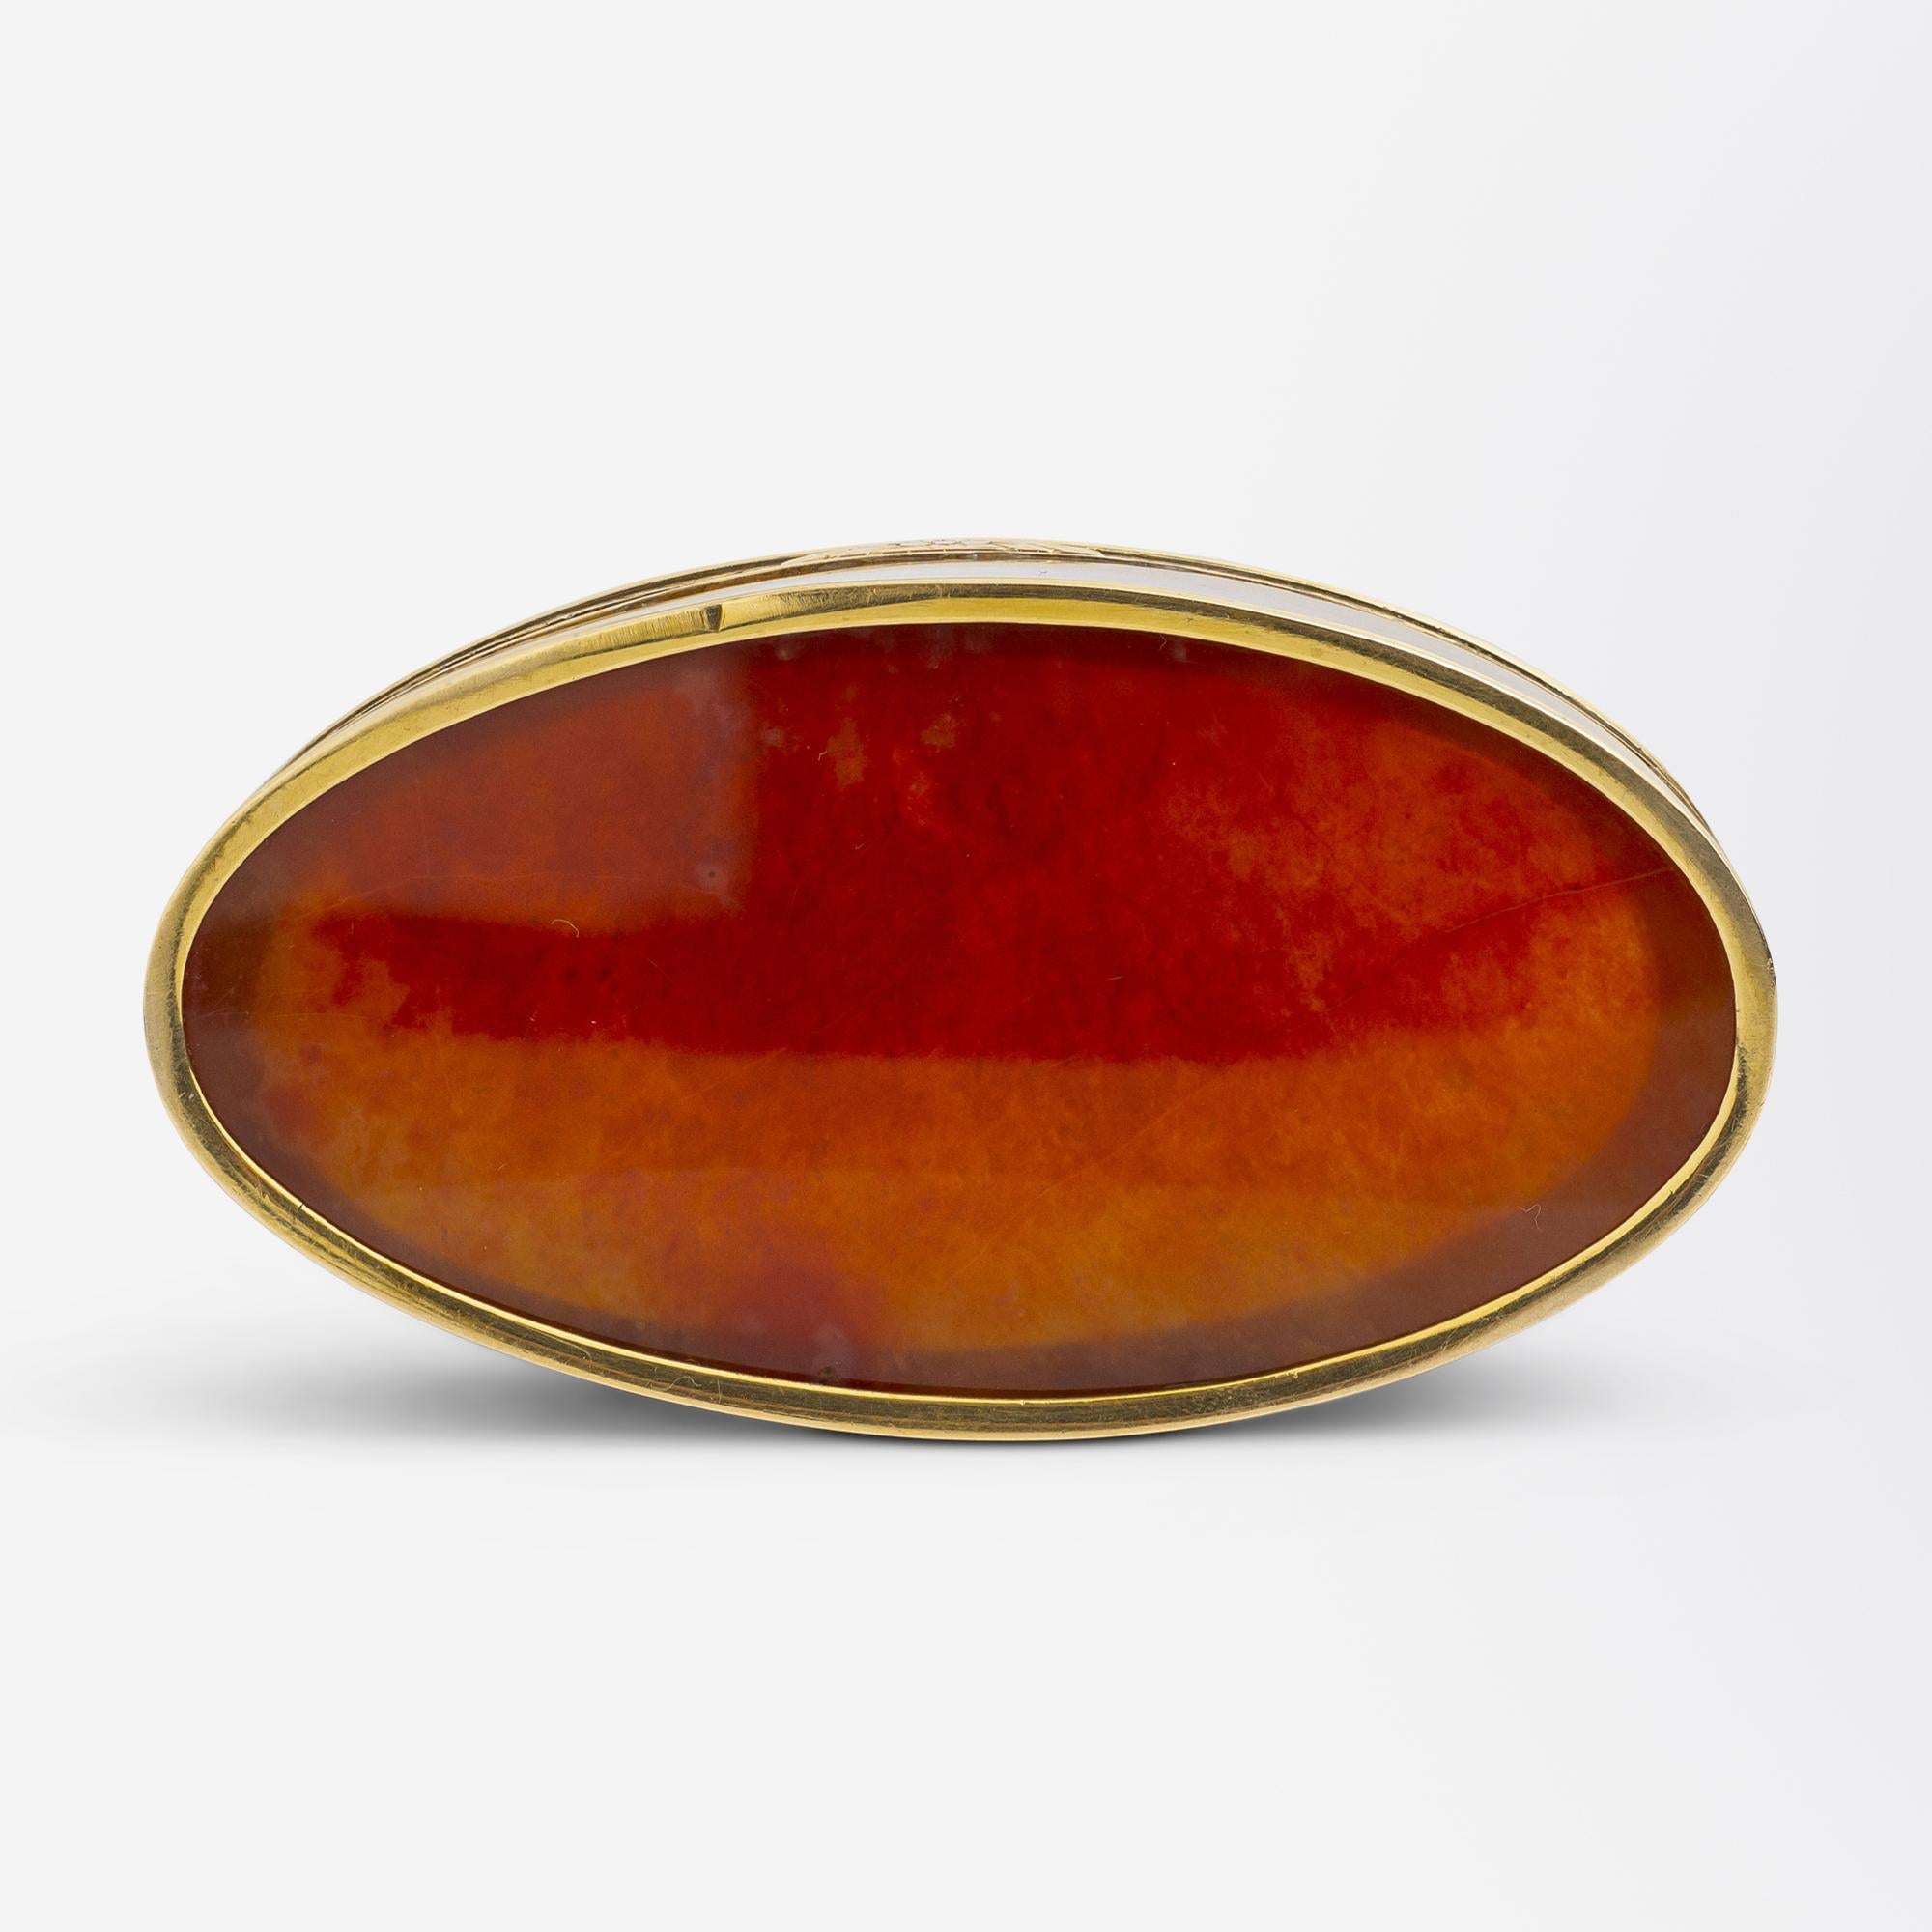 Oval Carnelian Agate Box With Gold Mounts 2